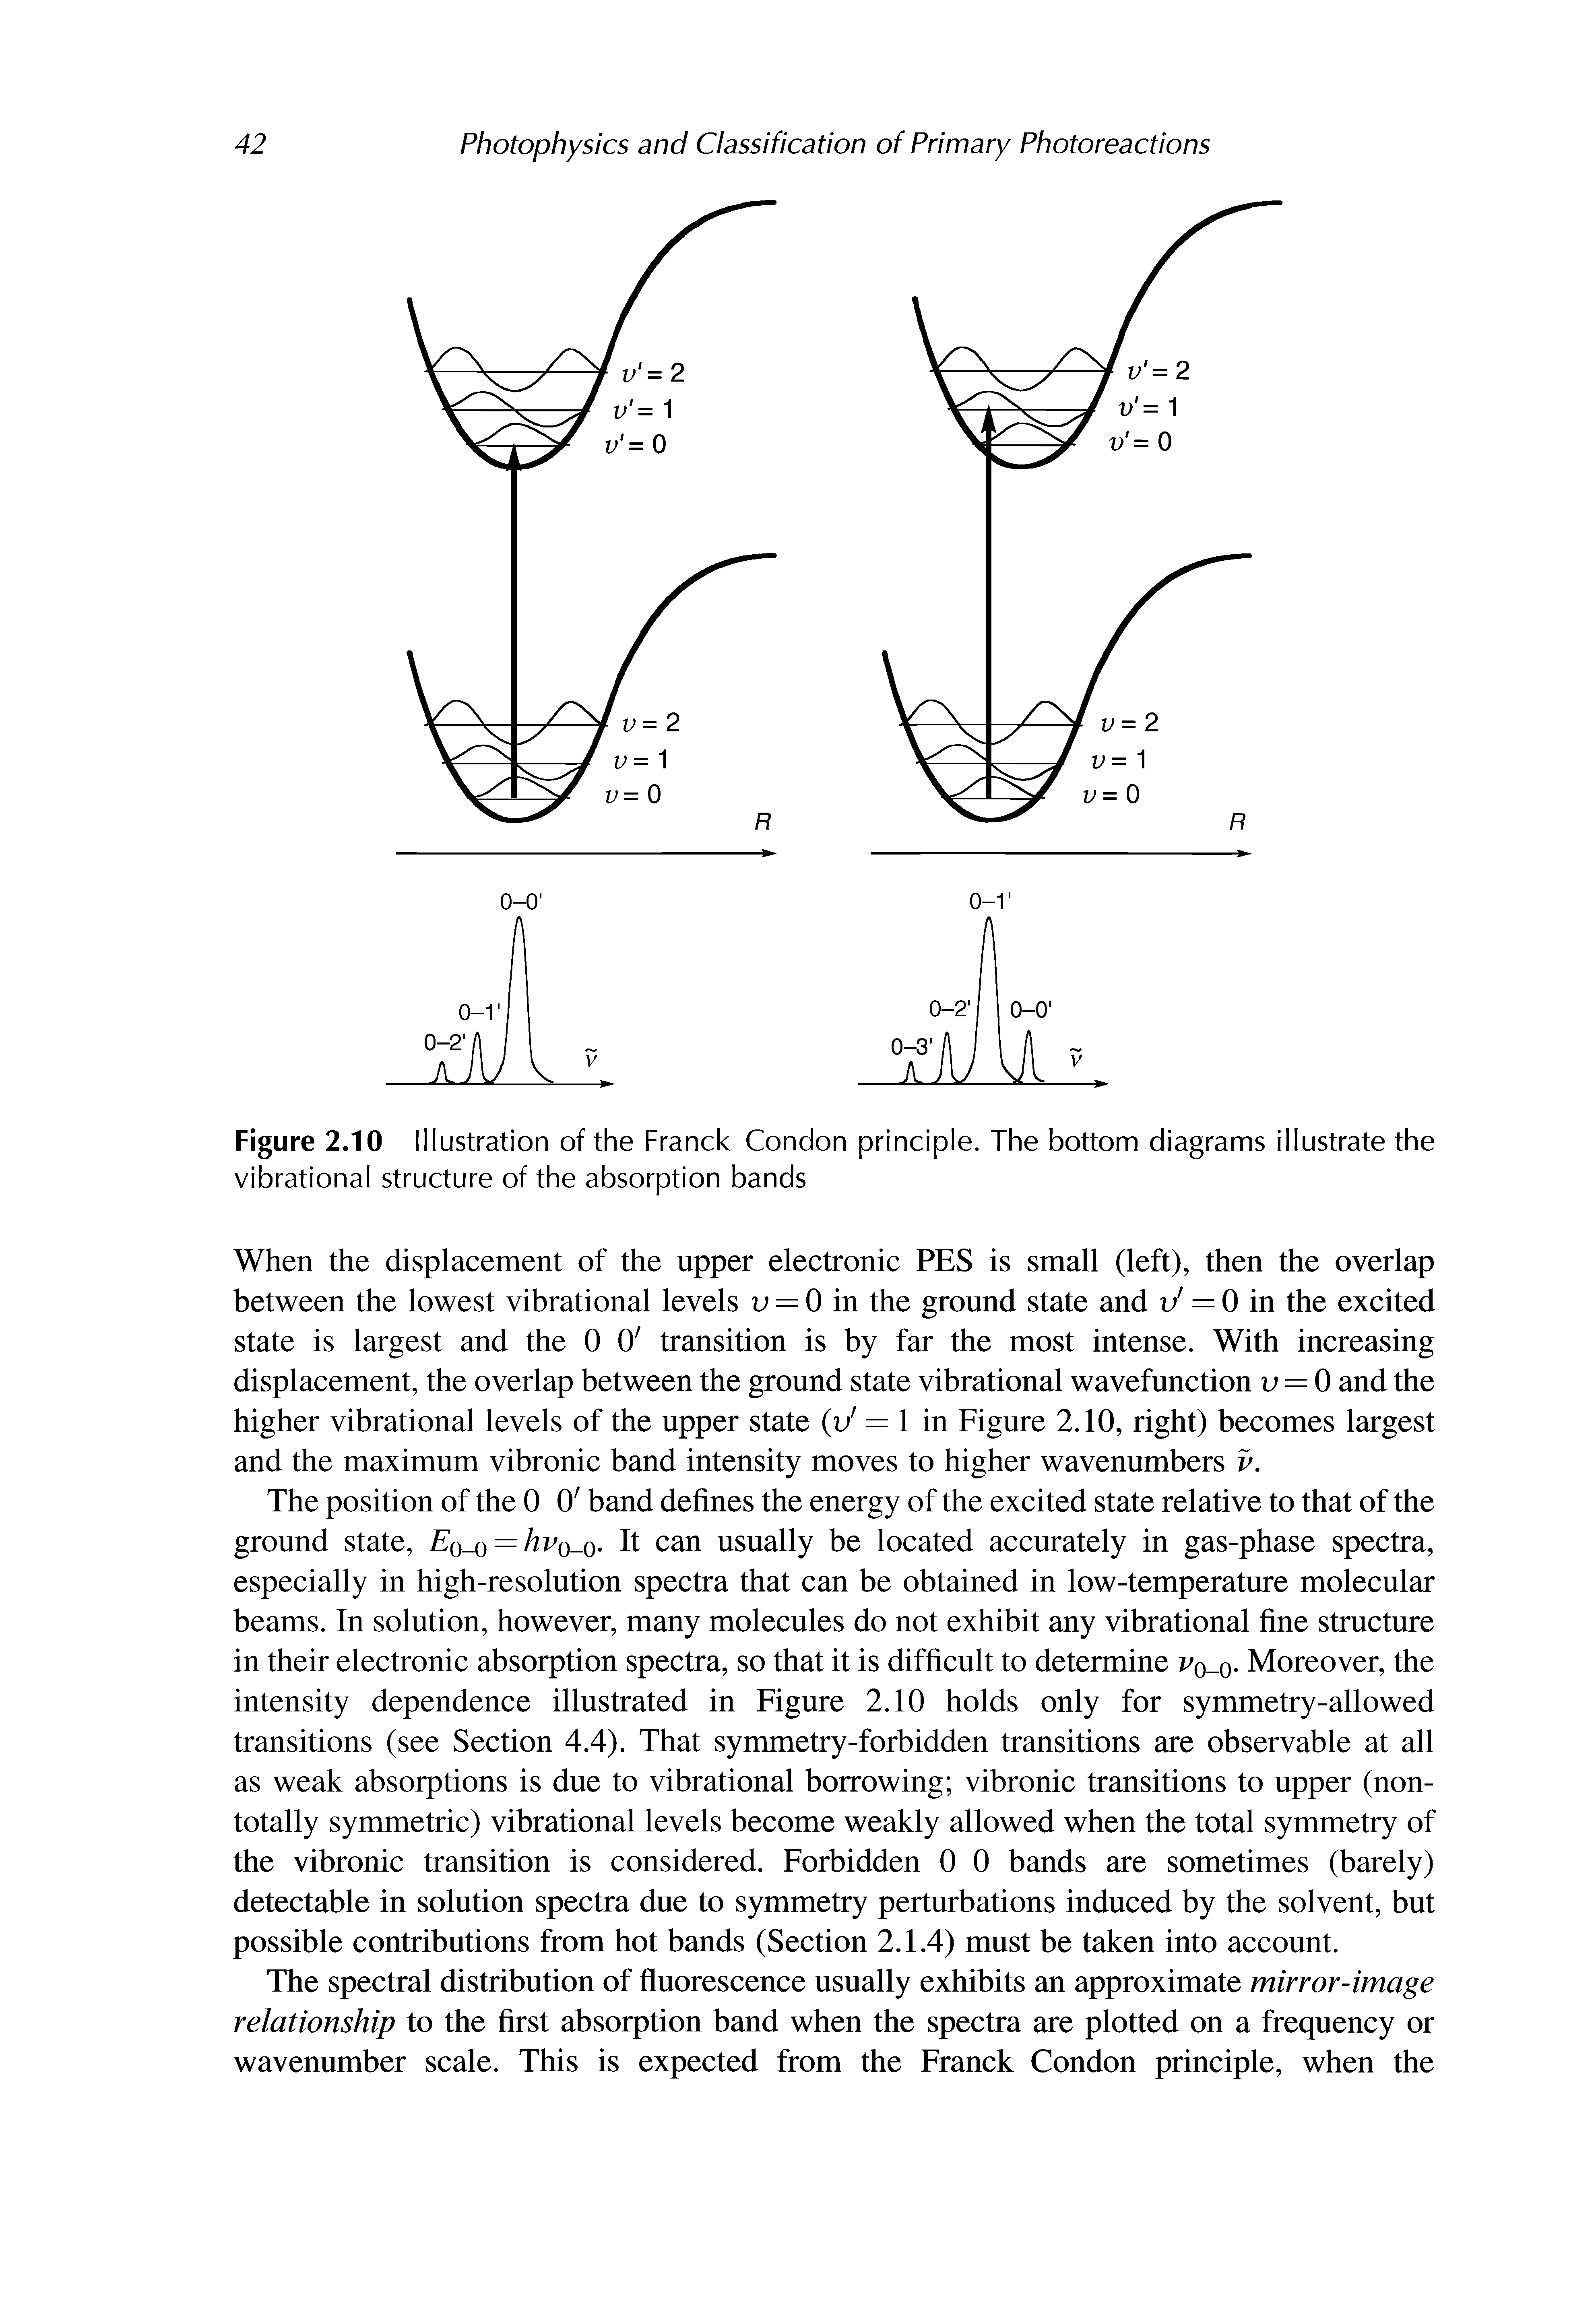 Figure 2.10 Illustration of the Franck Condon principle. The bottom diagrams illustrate the vibrational structure of the absorption bands...